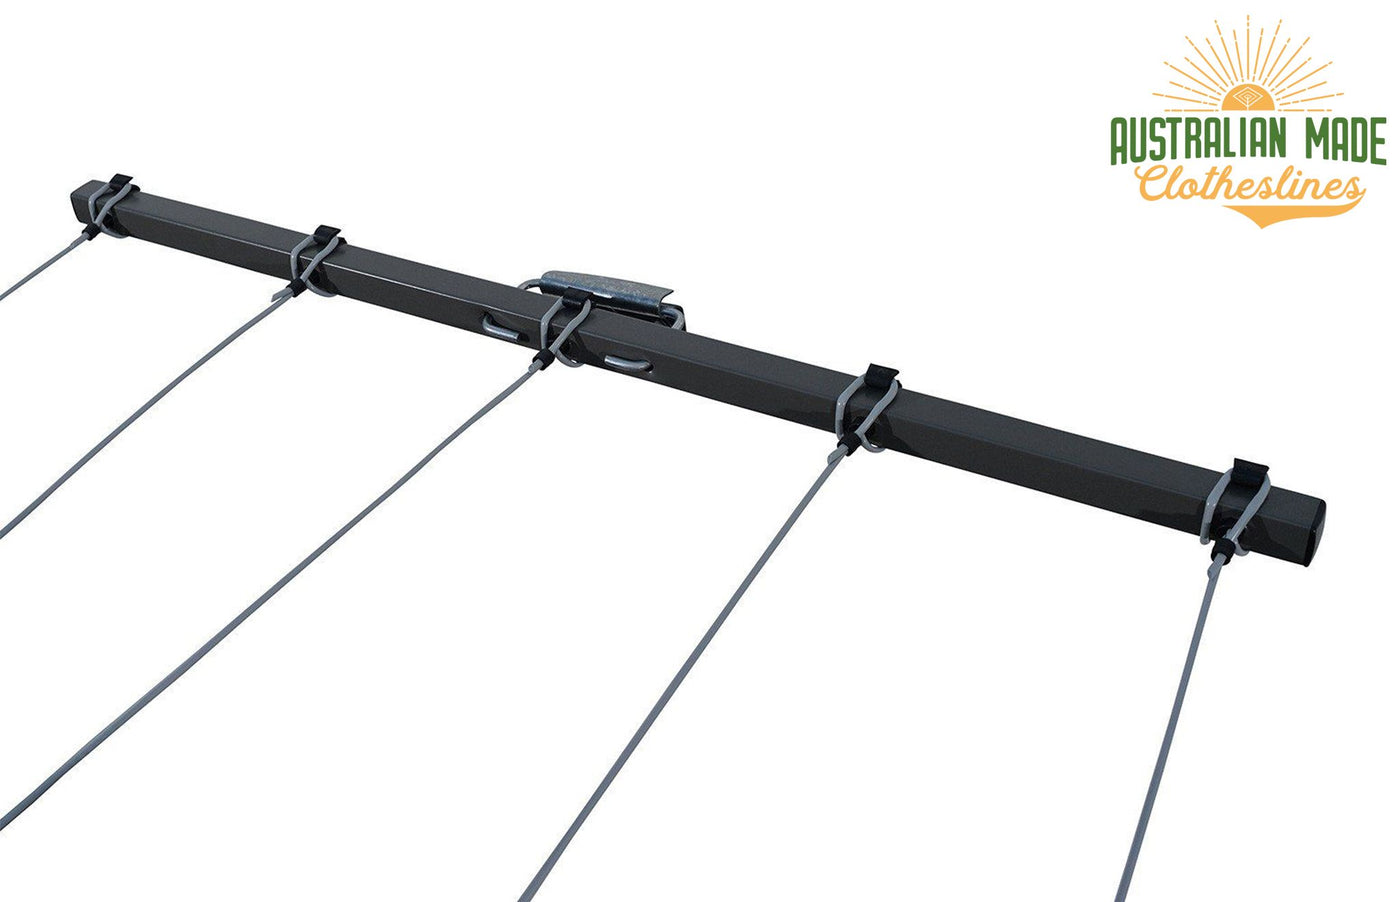 Austral Retractaway 40 Clothesline - Line Pulled Out - Australian Made Clotheslines